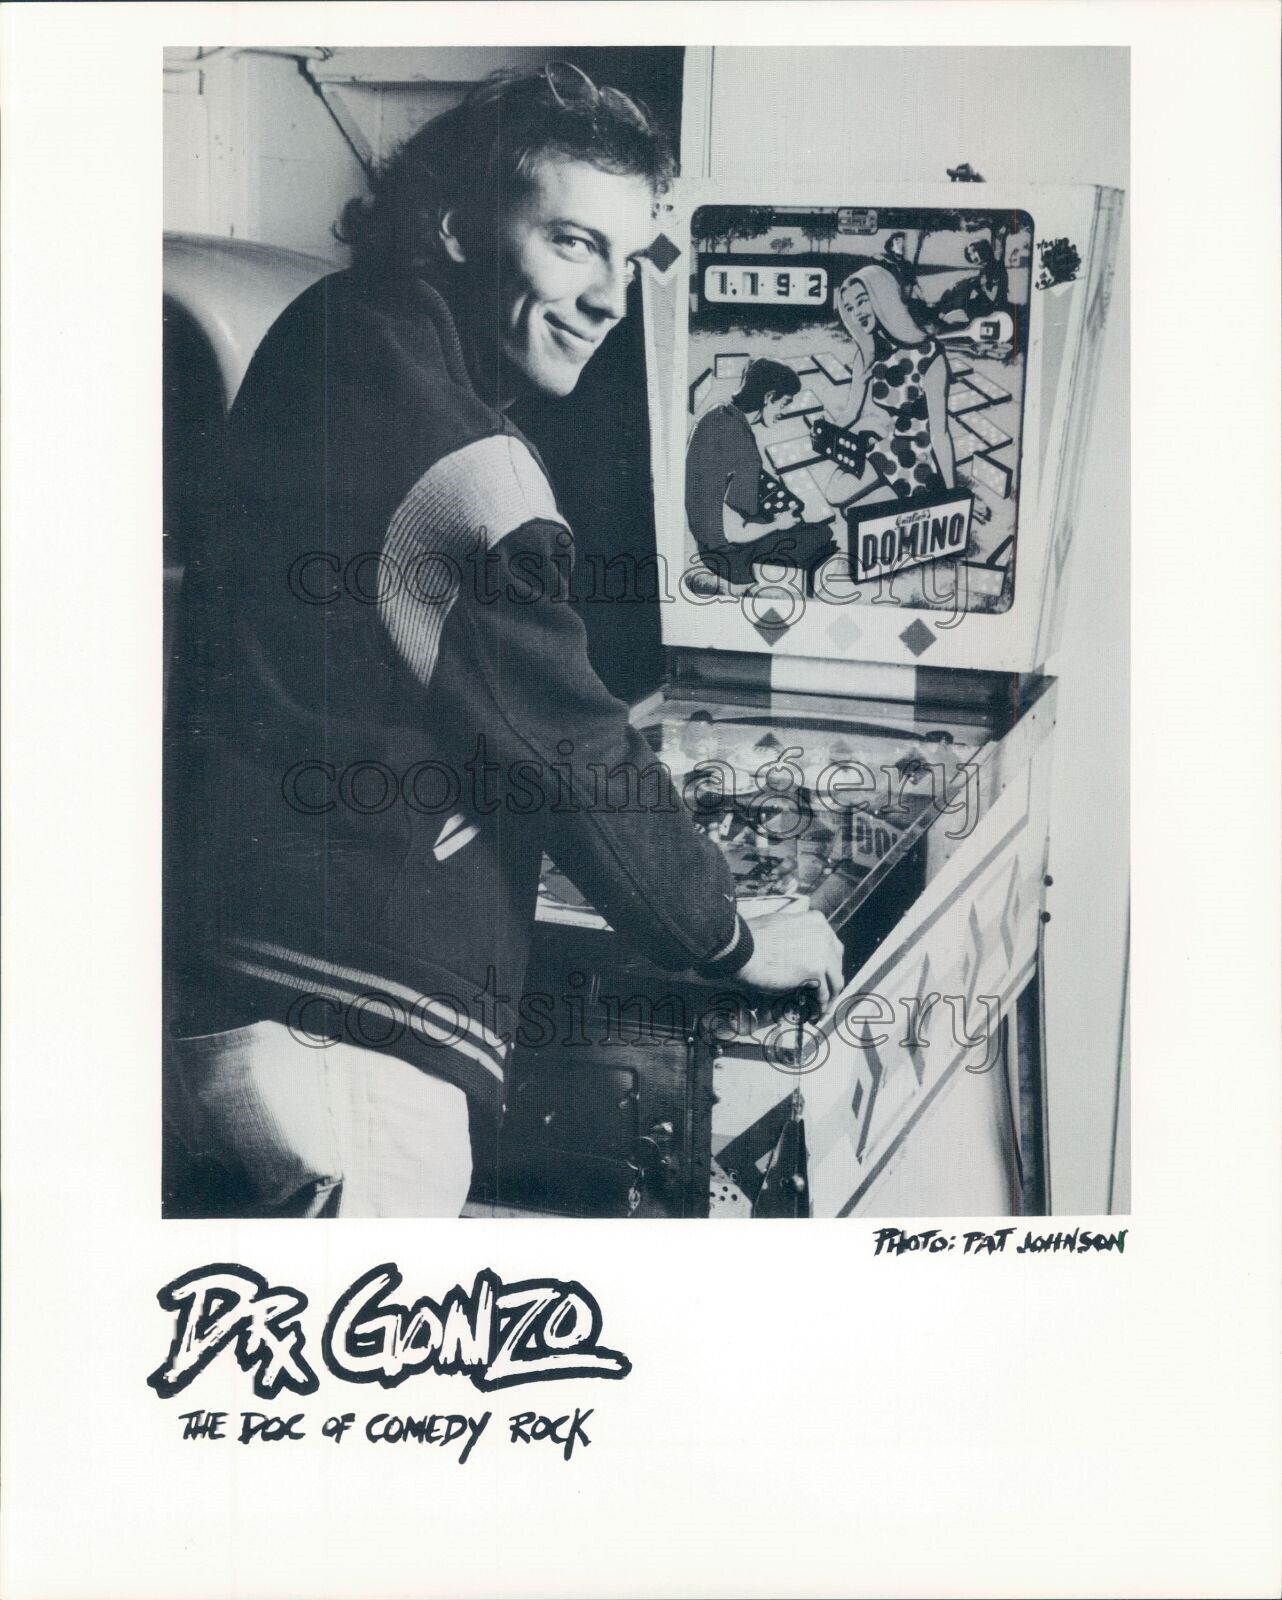 Press Photo Comedian John Means Plays Pinball Dr Gonzo Doc of Comedy Rock